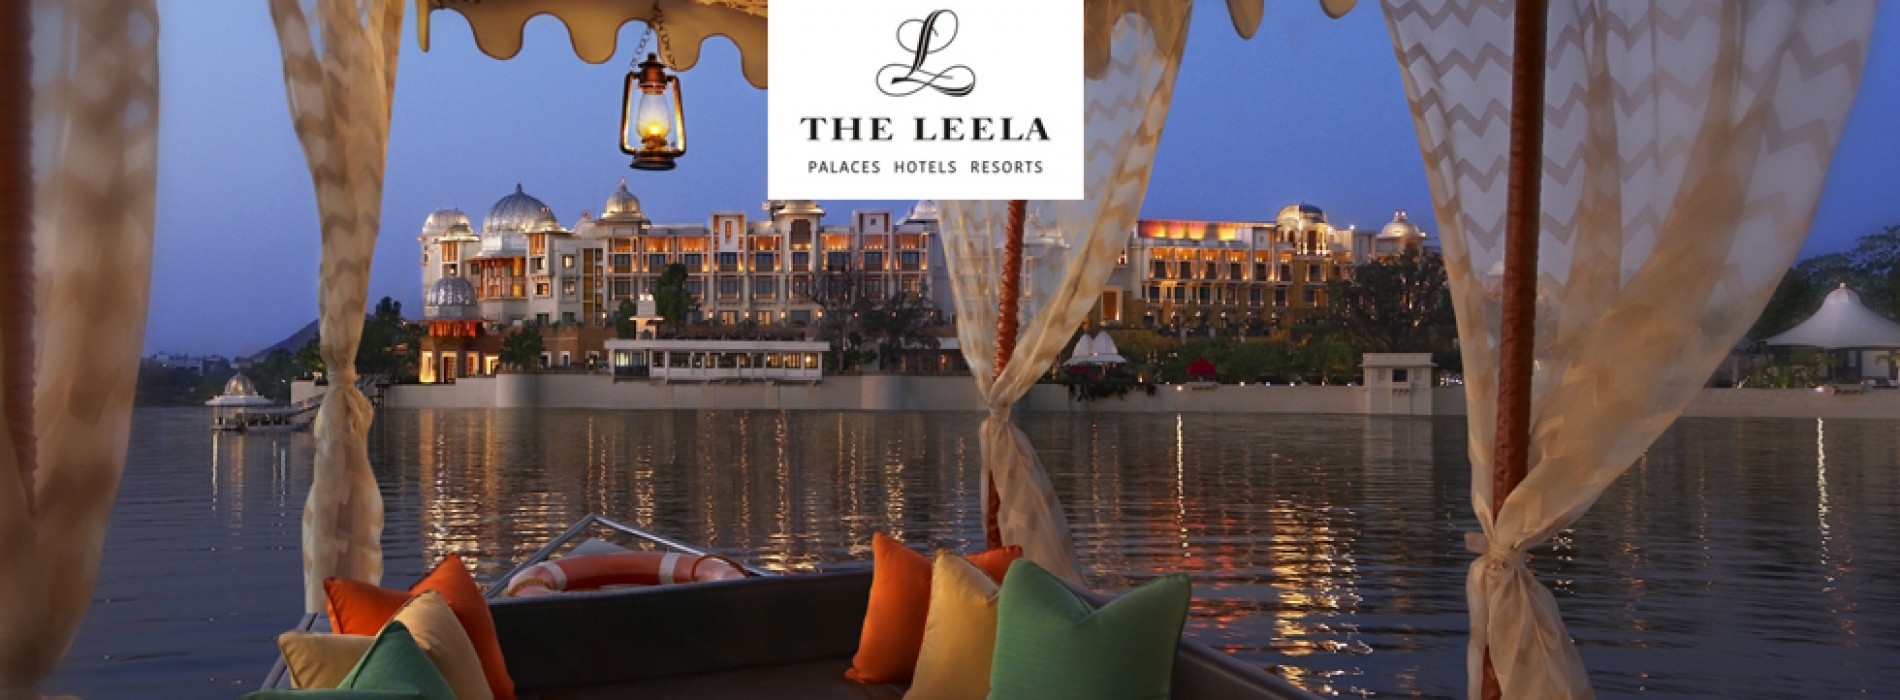 The Leela Palace Udaipur voted one of the best hotels in the world